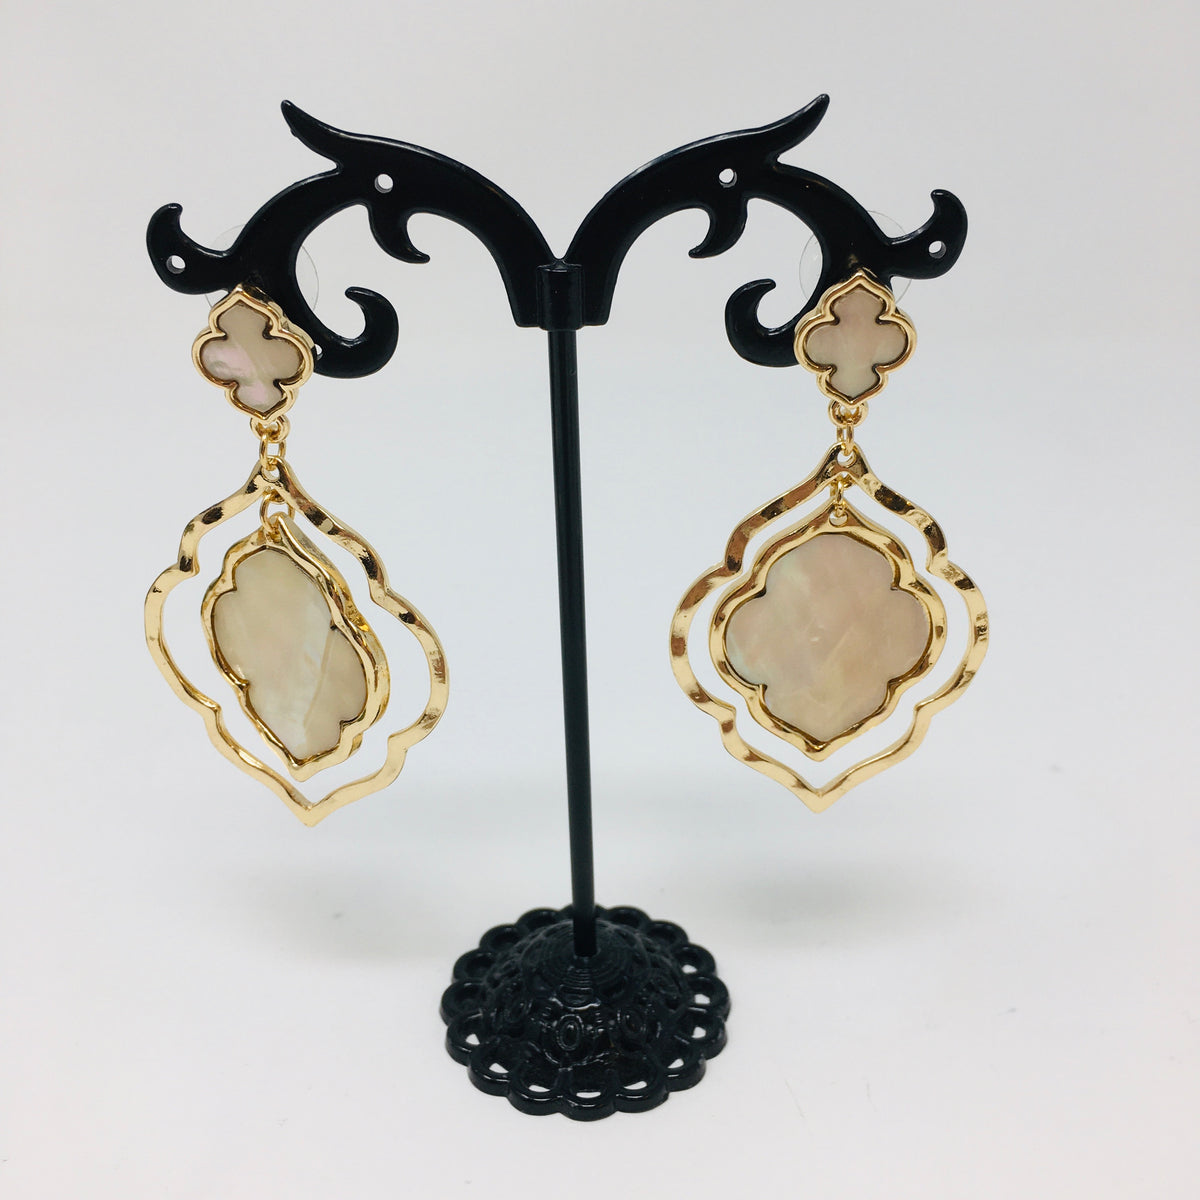 double layer arabesque shaped gold tone earrings with mother of pearl inserts shown hanging from a black earring stand on a white background